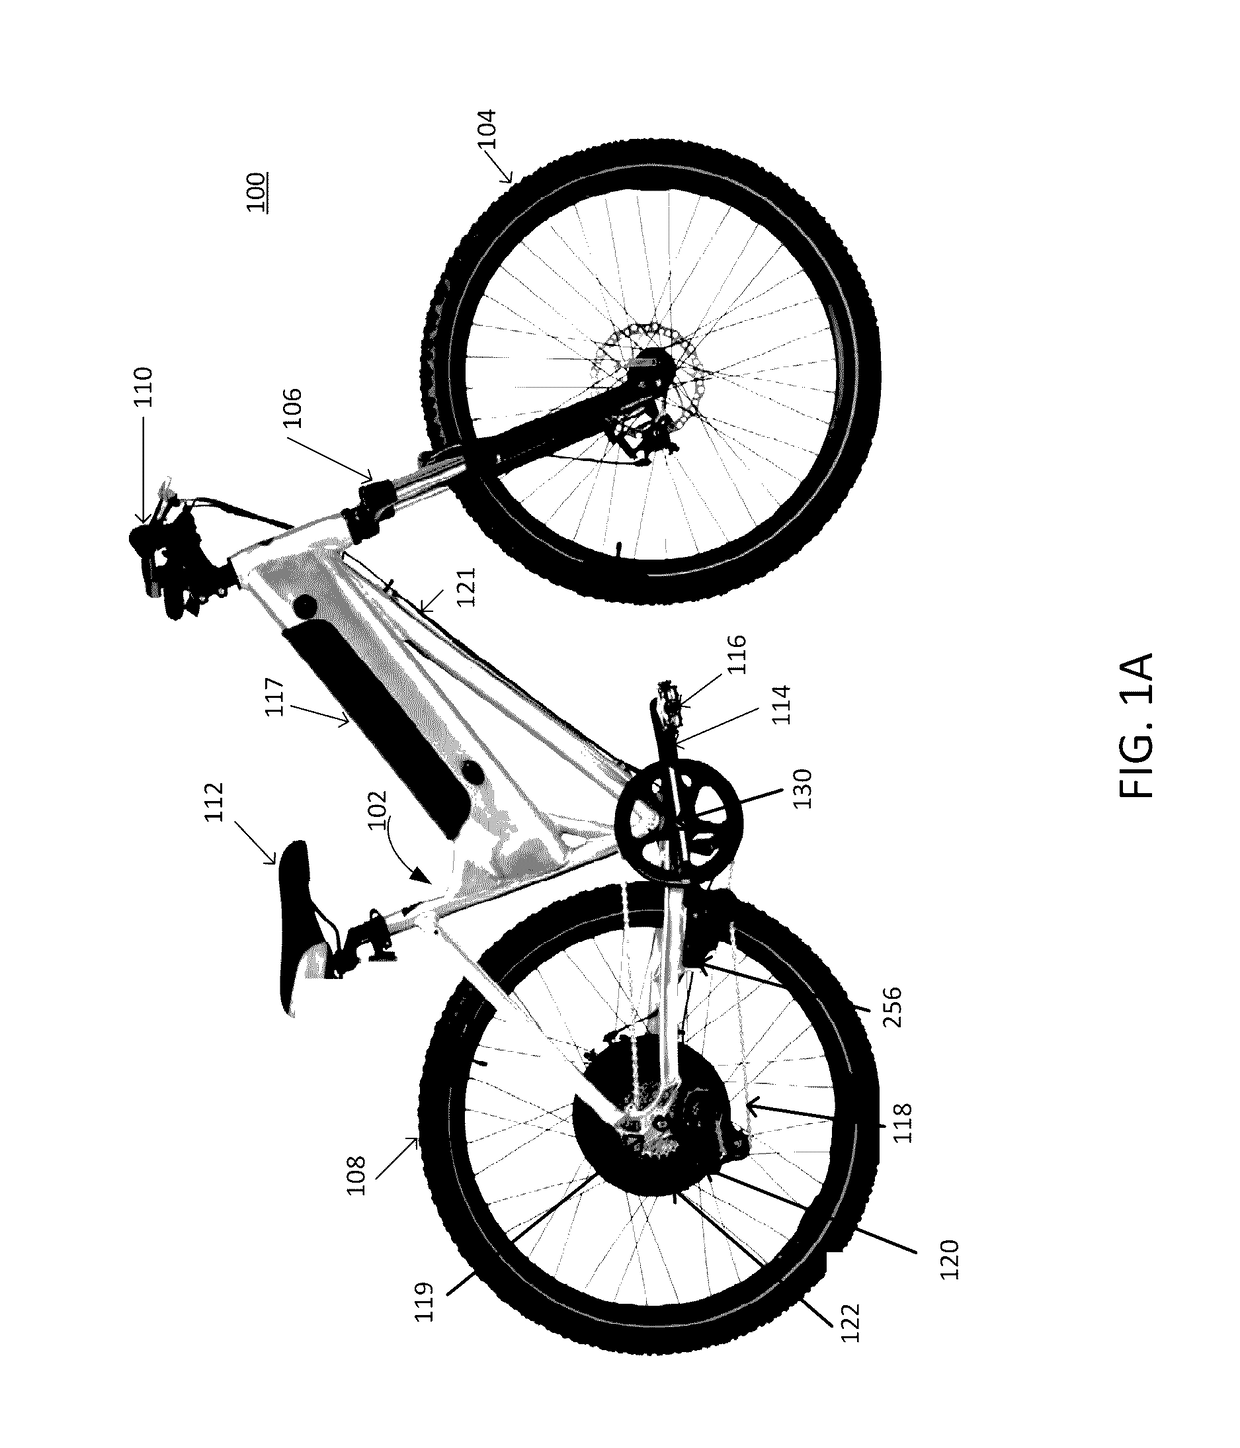 Motorized bicycle with pedal regeneration with automatic assistance